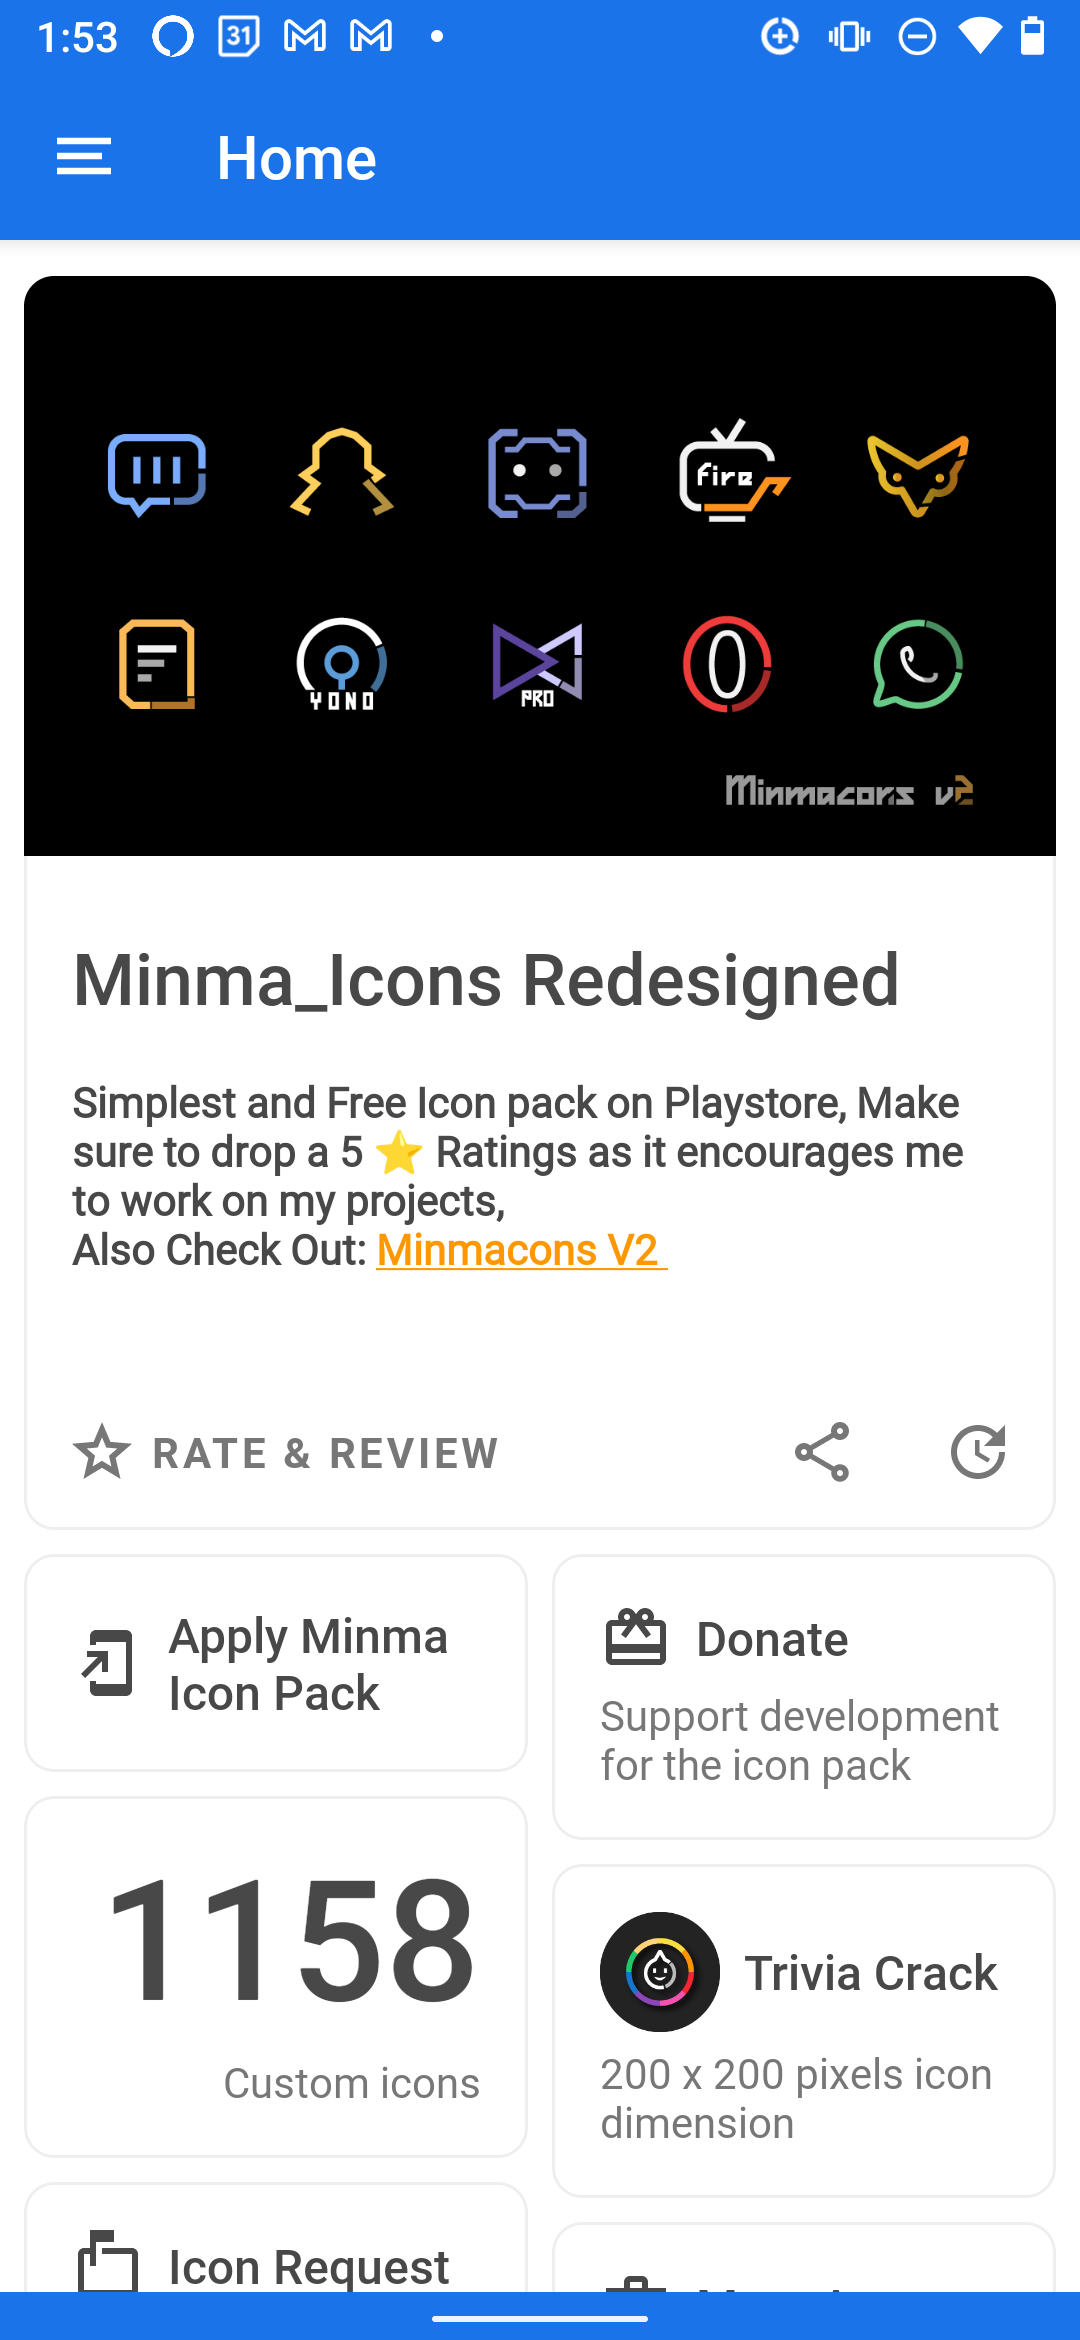 minma icon pack is a two-click apply